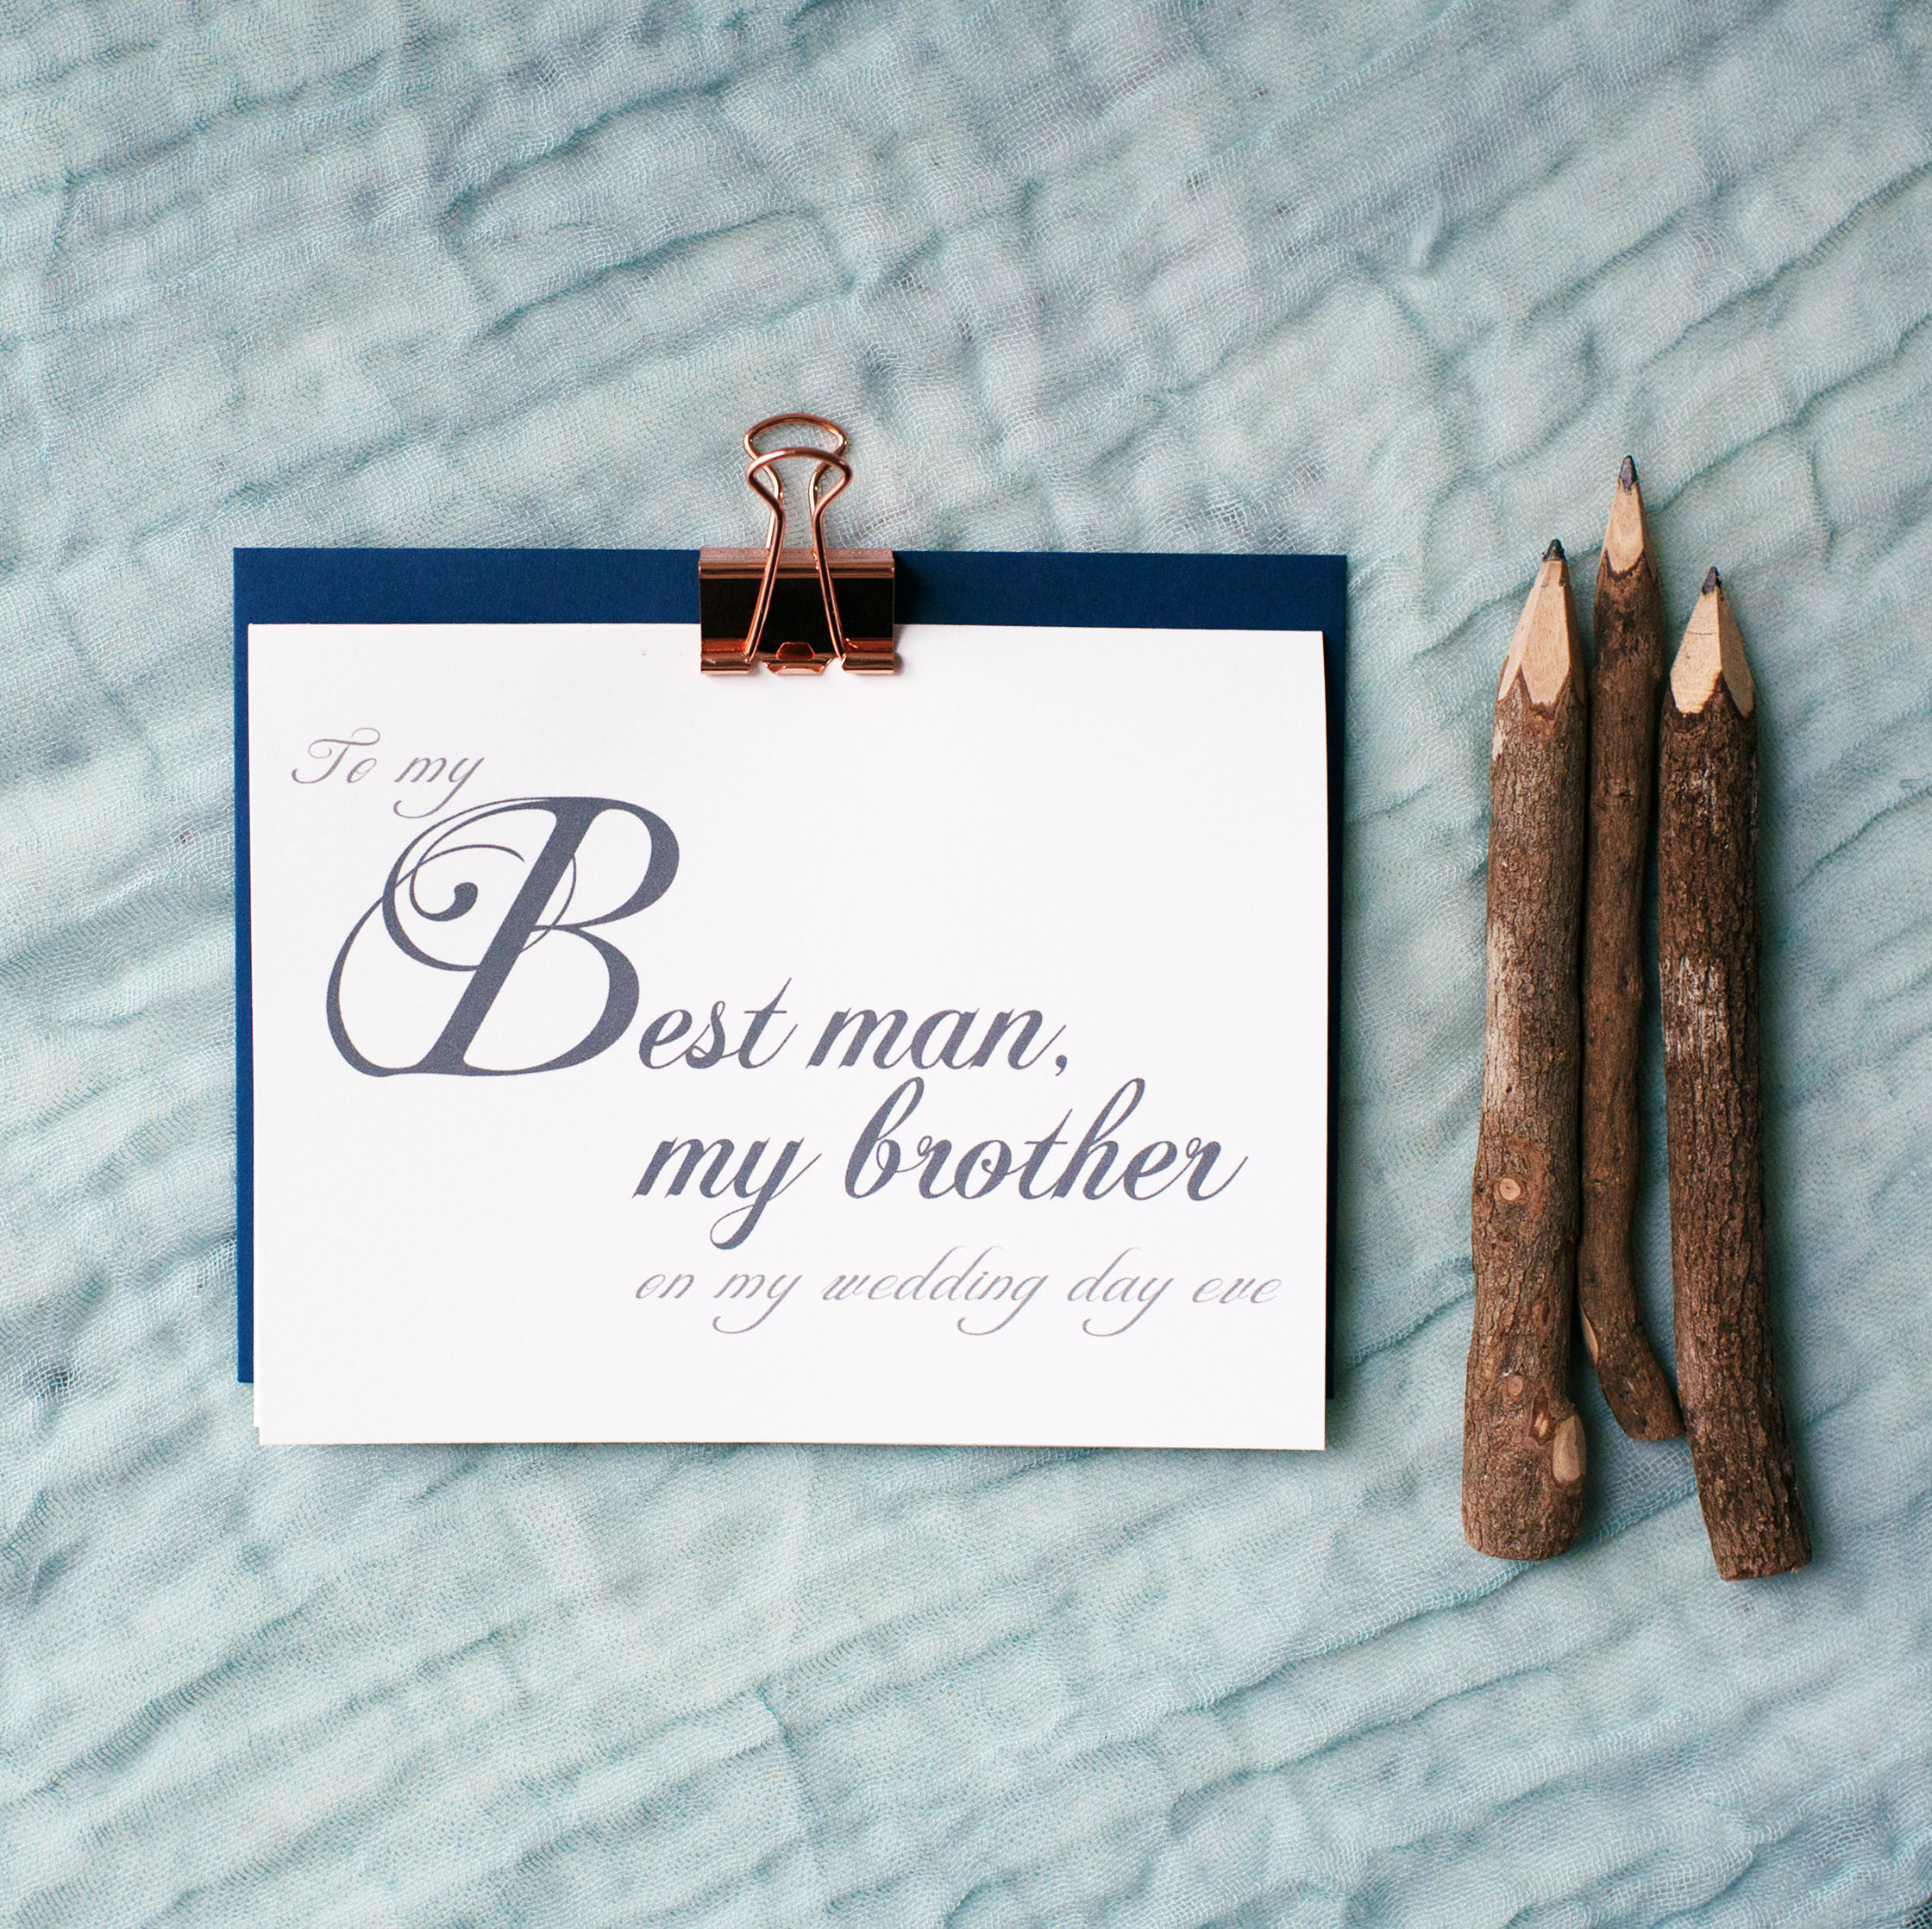 To My Best Man, My Brother On My Wedding Day Eve Card